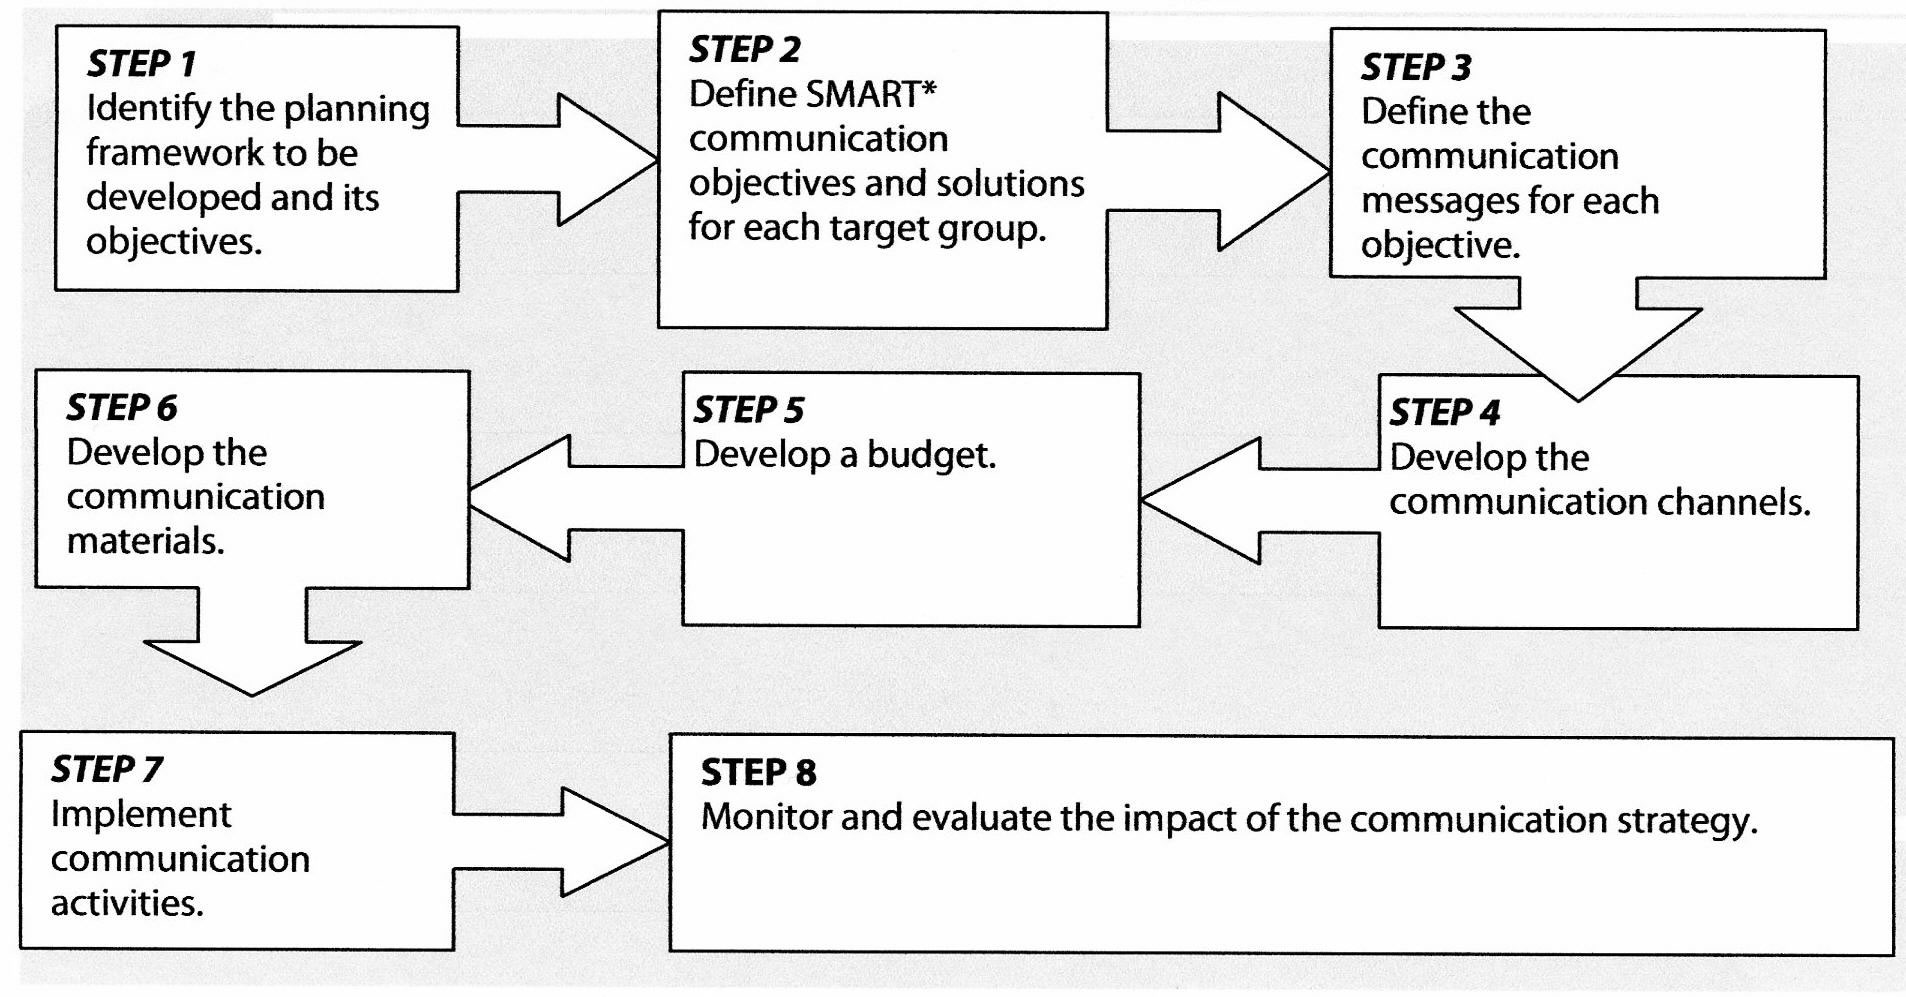 Steps for a mainstreaming communications strategy